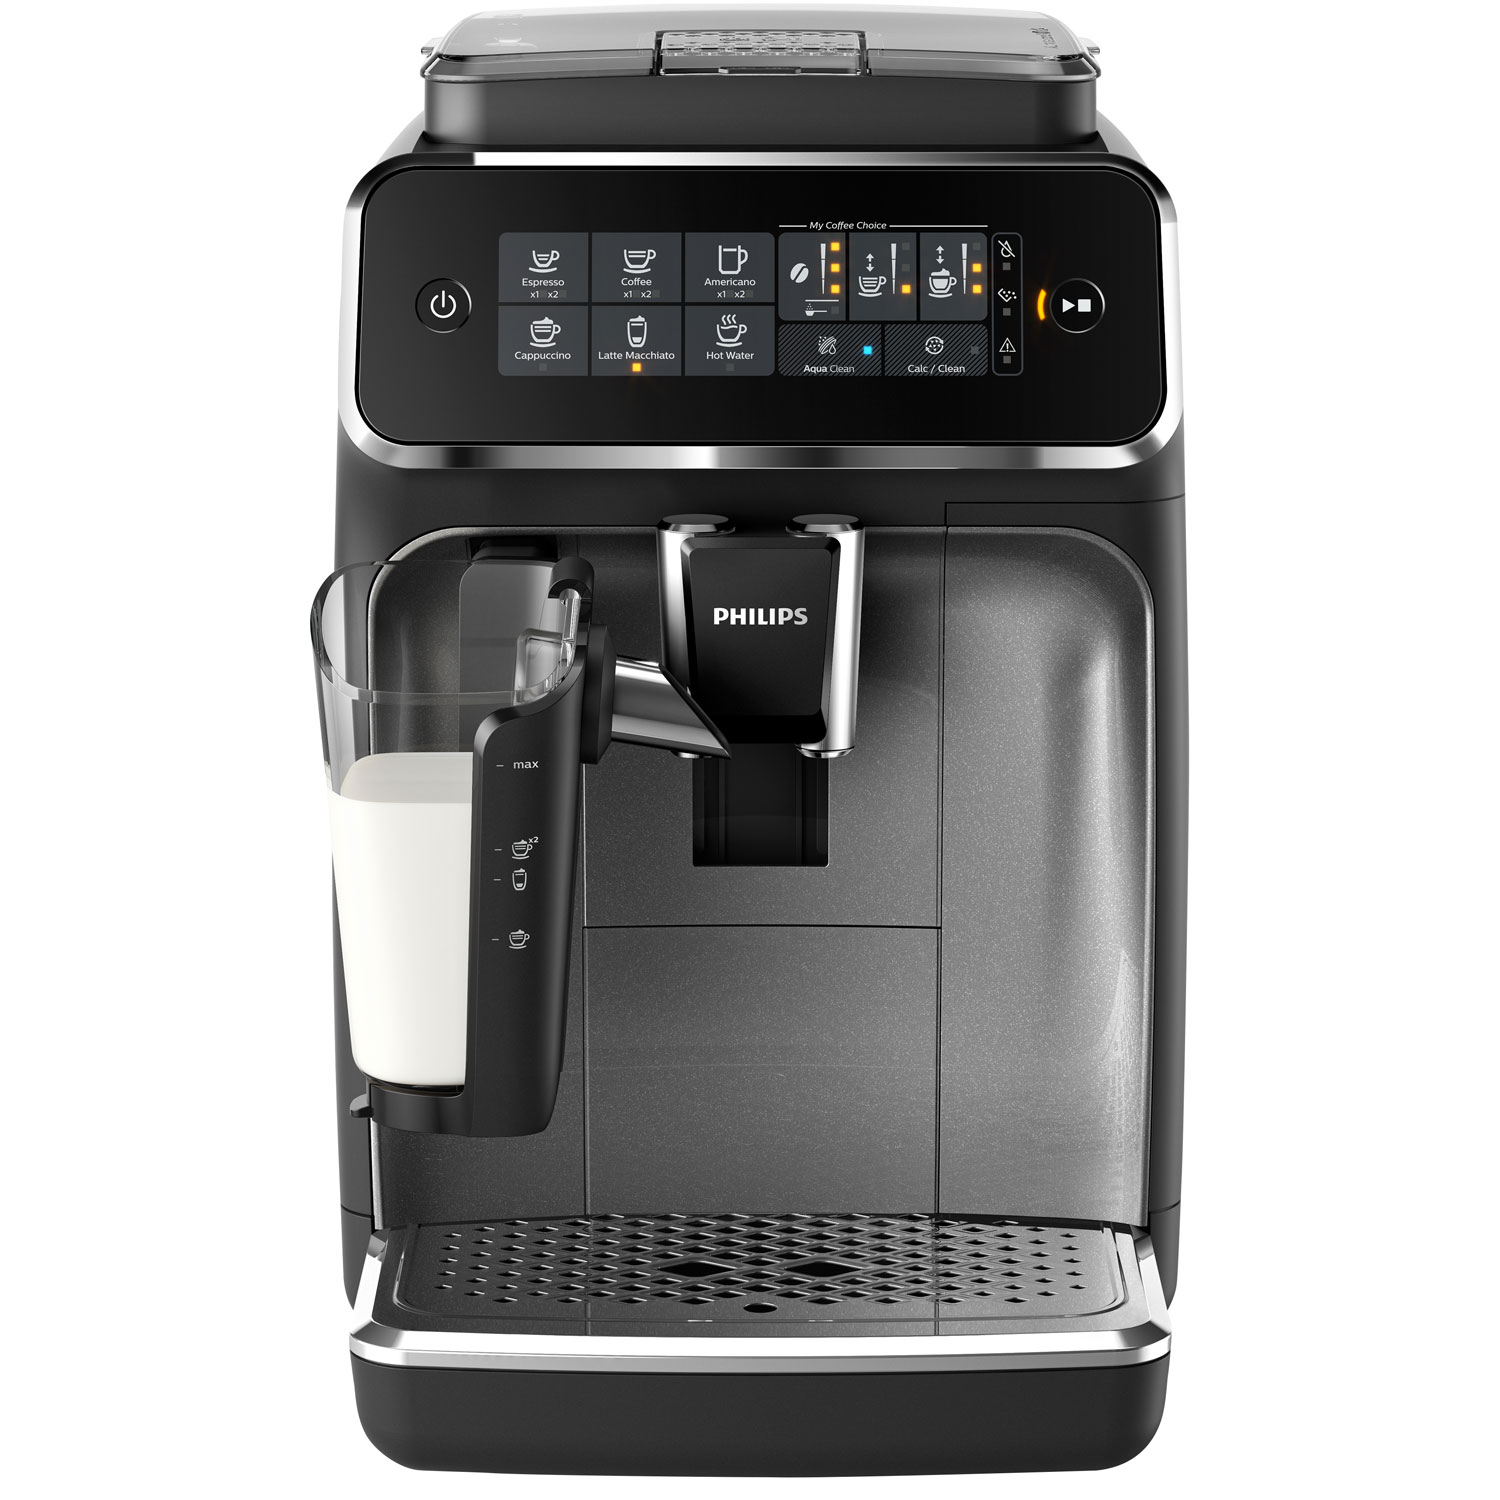 Philips 3200 Automatic Espresso Machine with LatteGo Milk Frother - Stainless Steel